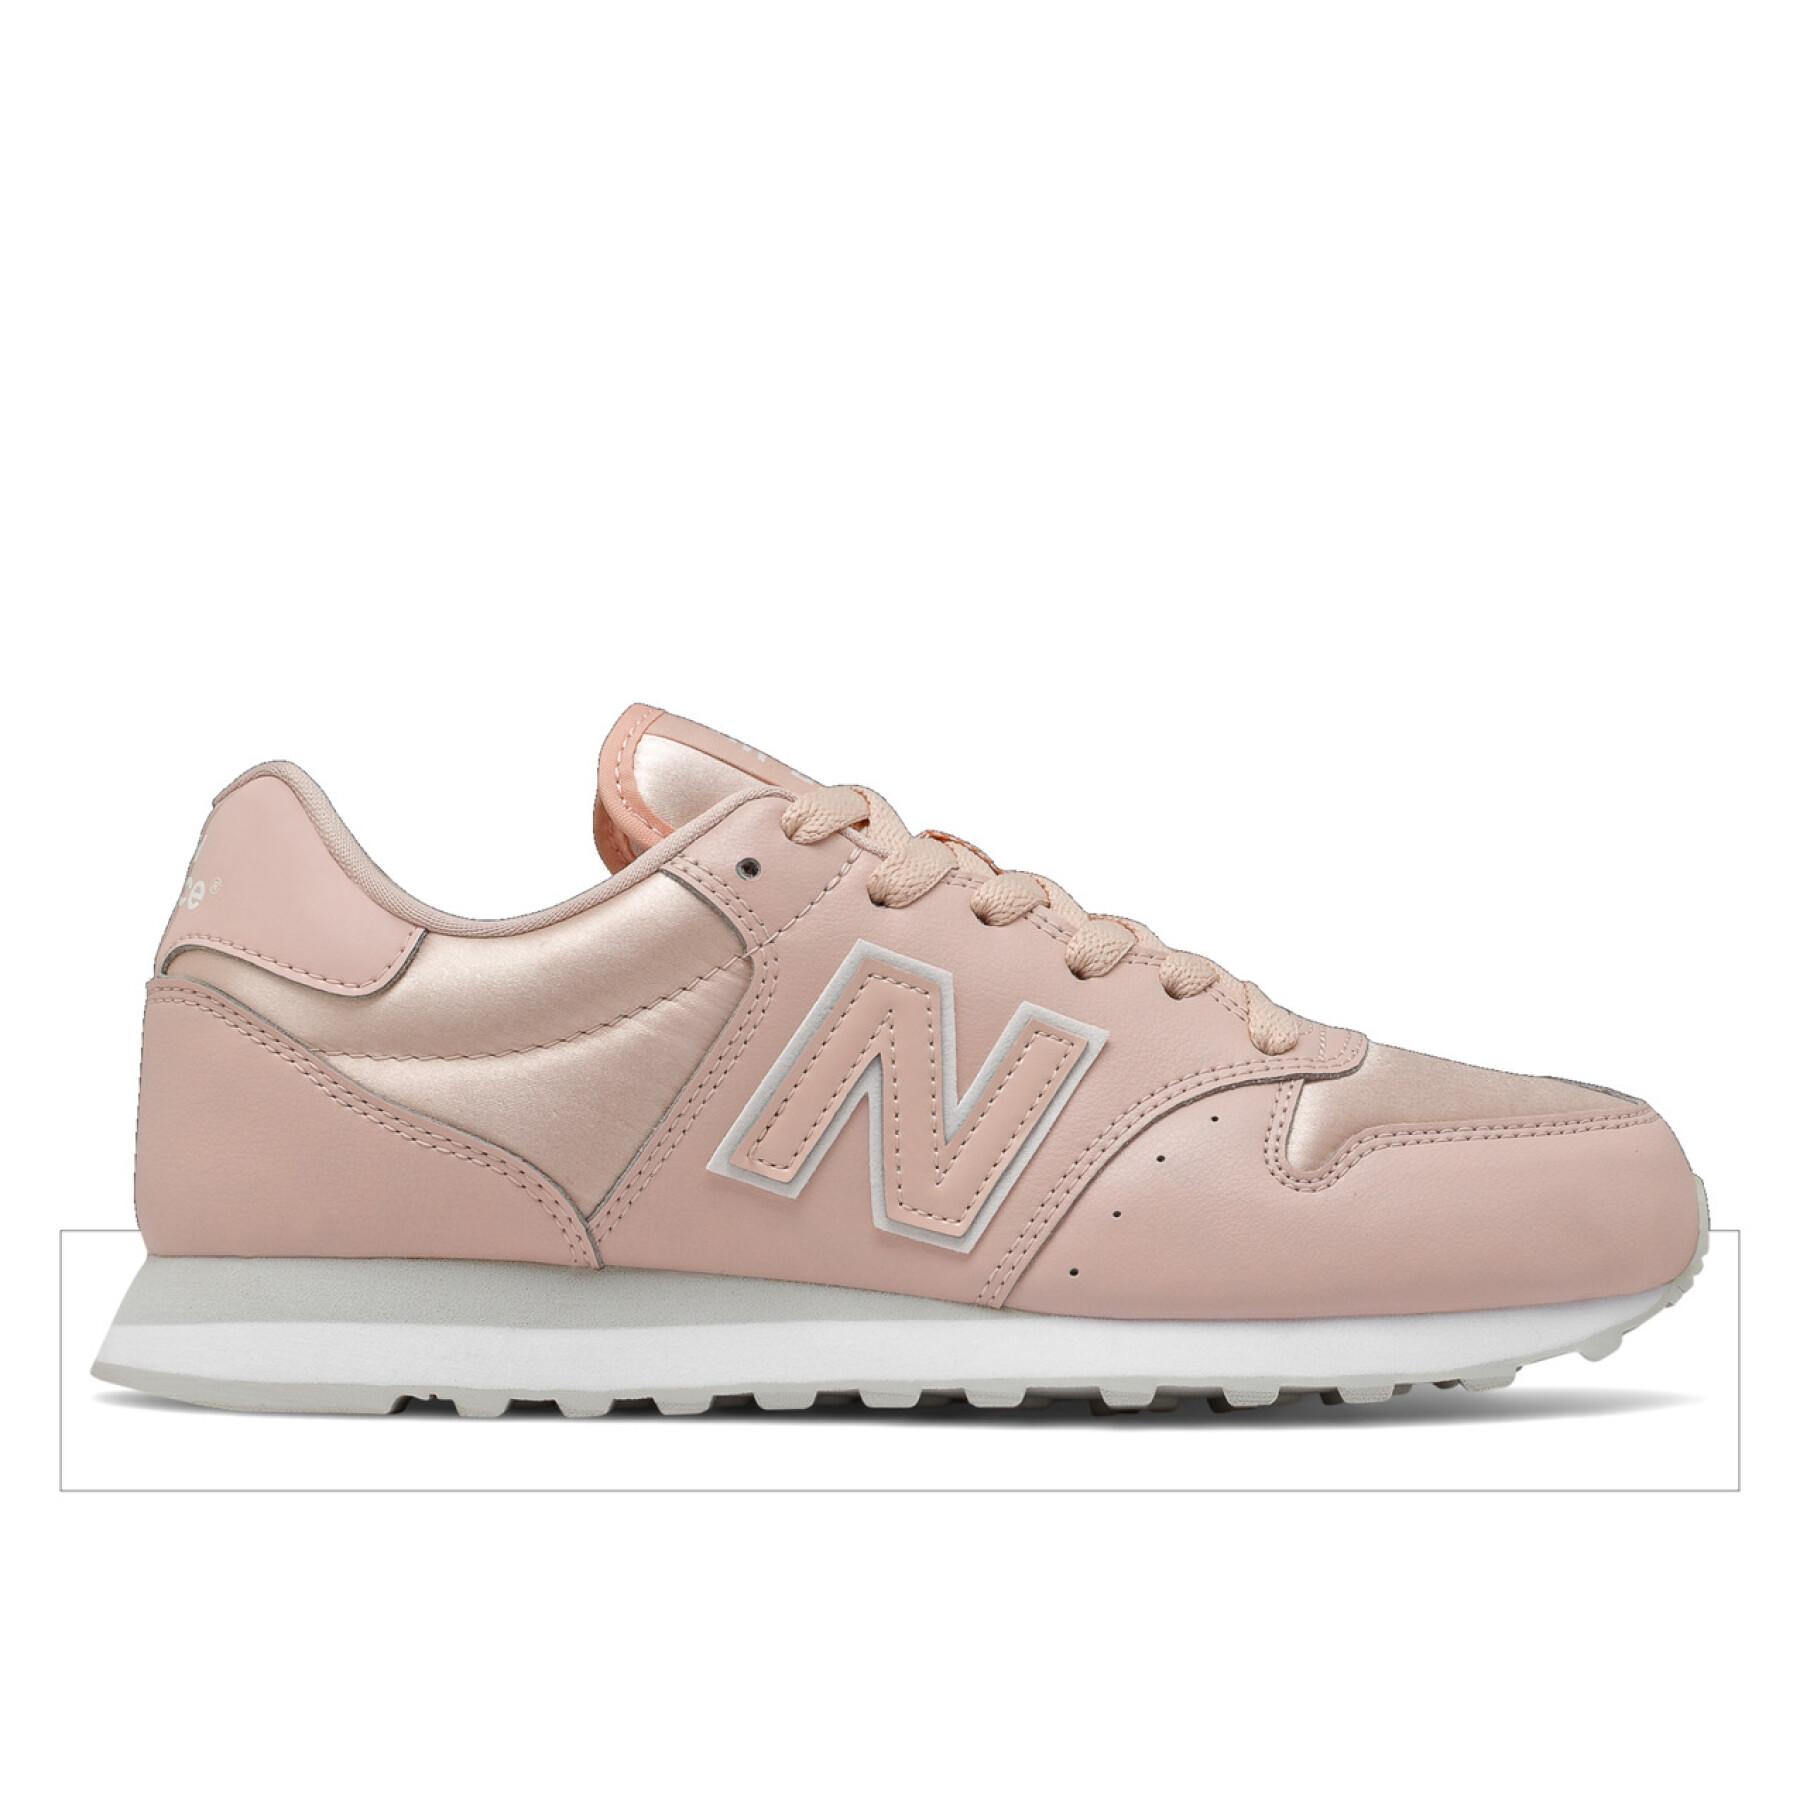 Chaussures femme New Balance 500 classic